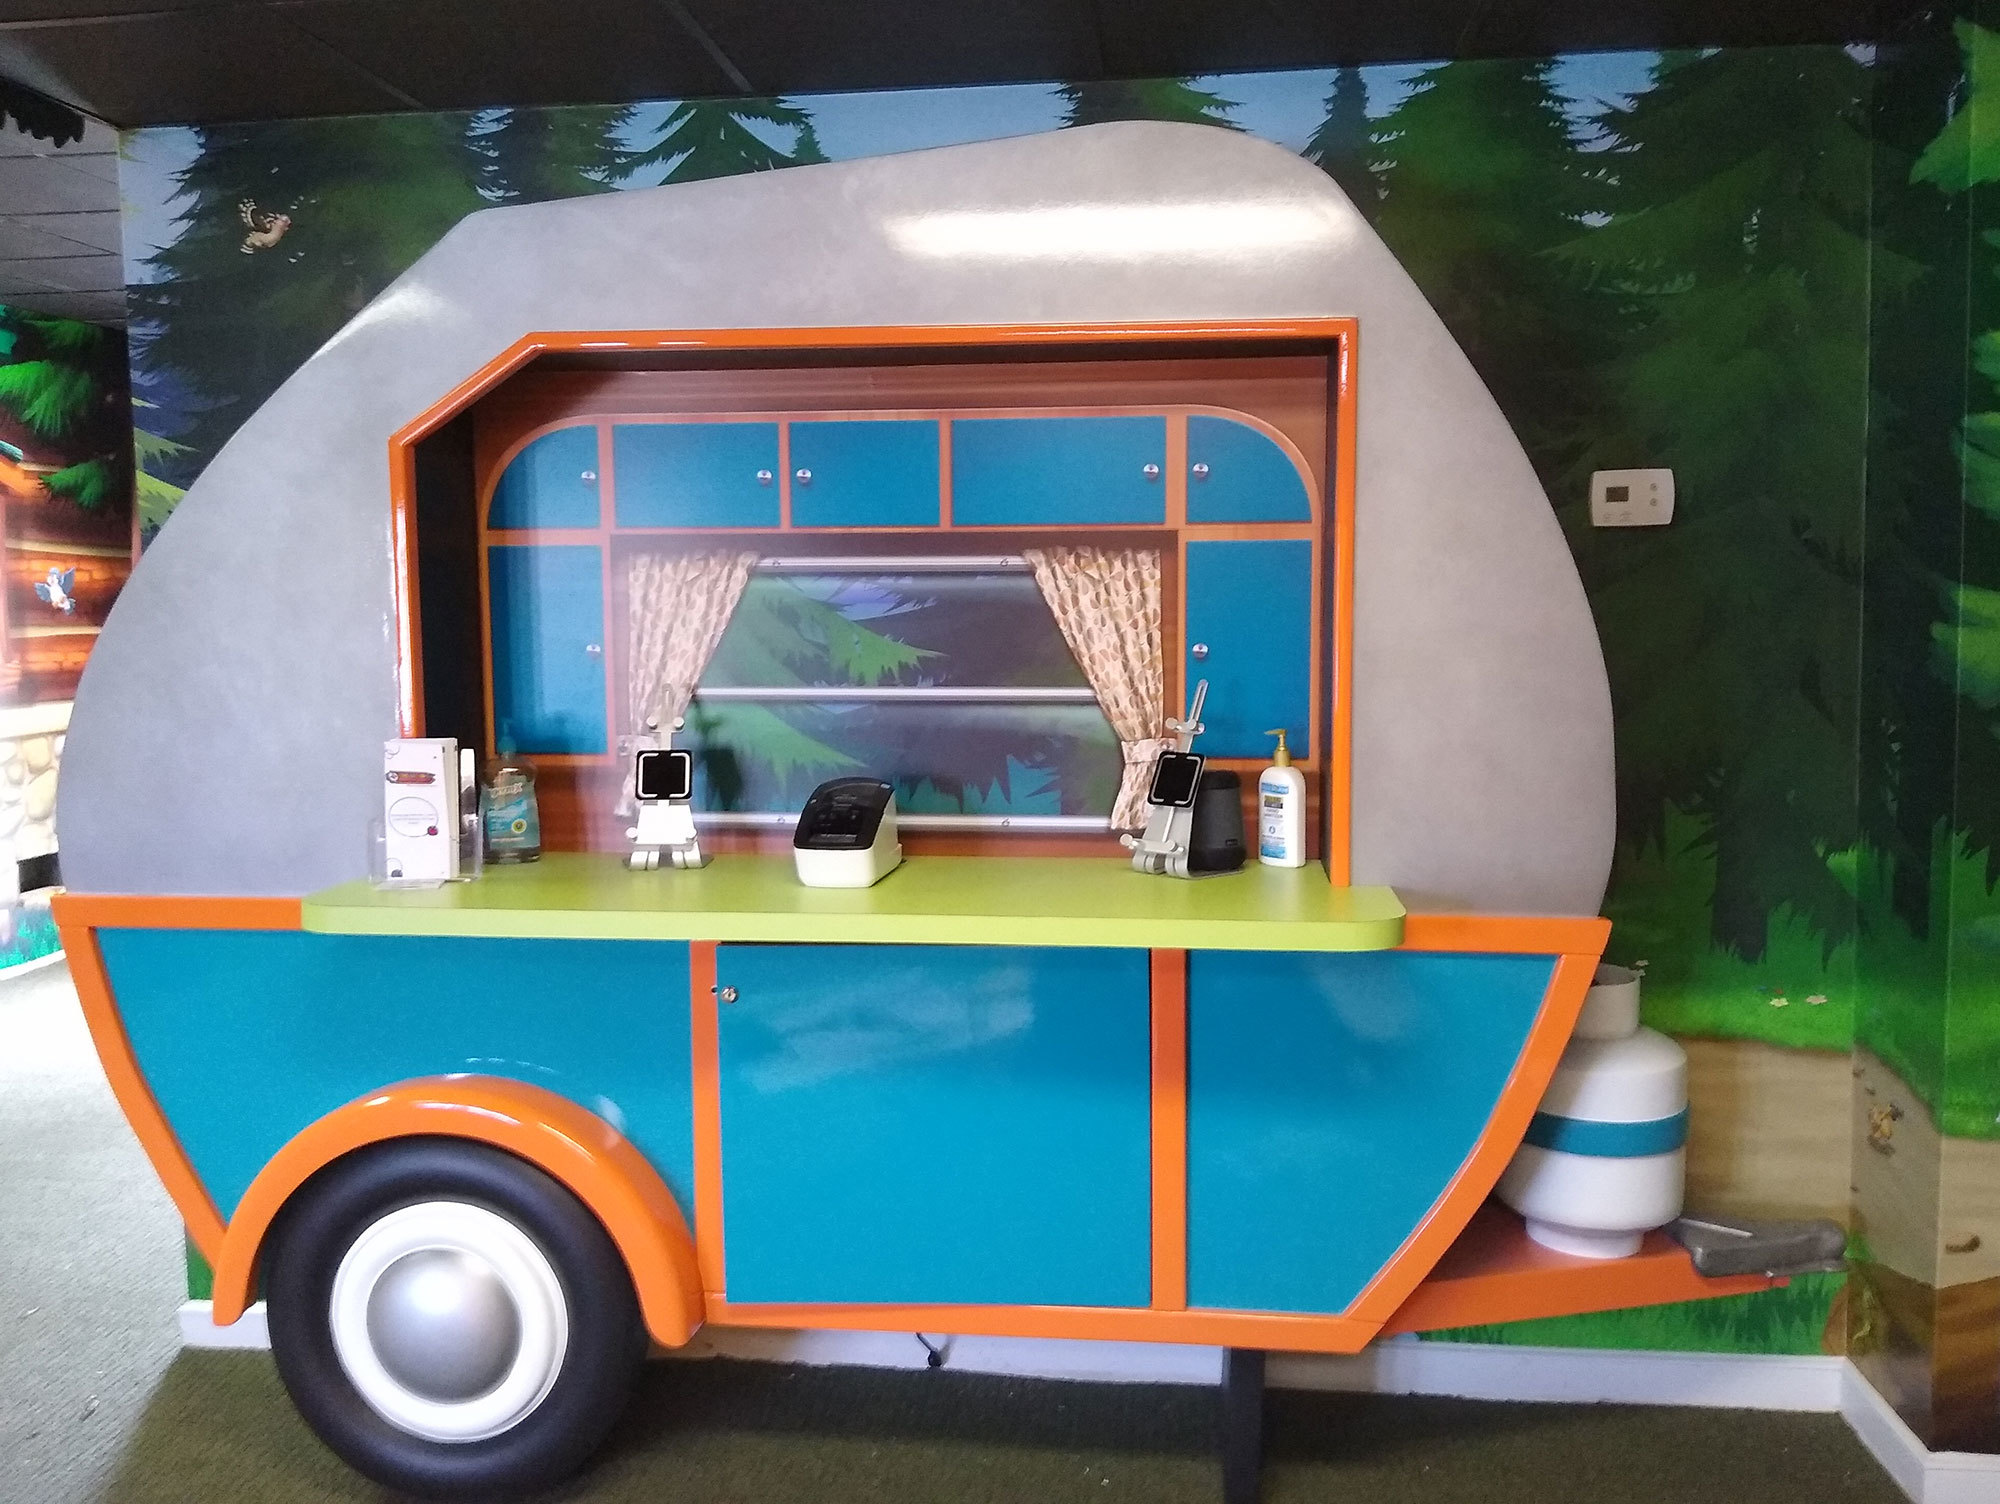 Camping Themed Check-In Kiosk designed as a life-size blue and silver vintage travel trailer